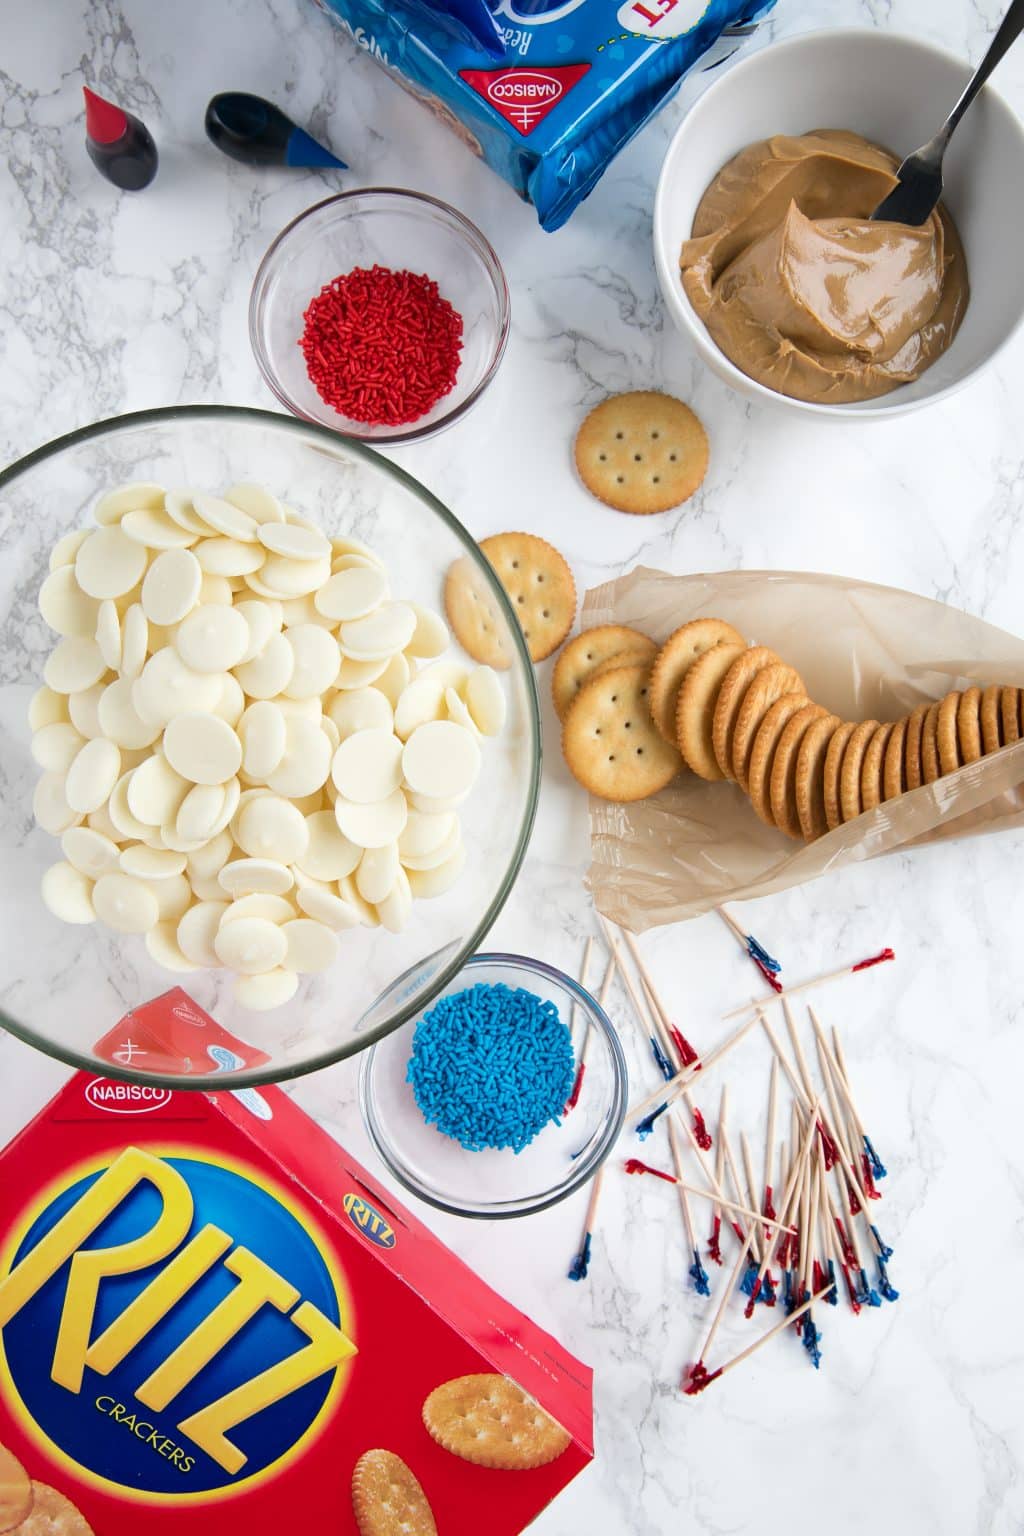 Creamy Peanut Butter Sandwiched between Buttery RITZ Cracker and dipped in swirled Red, White, and Blue melted white Chocolate